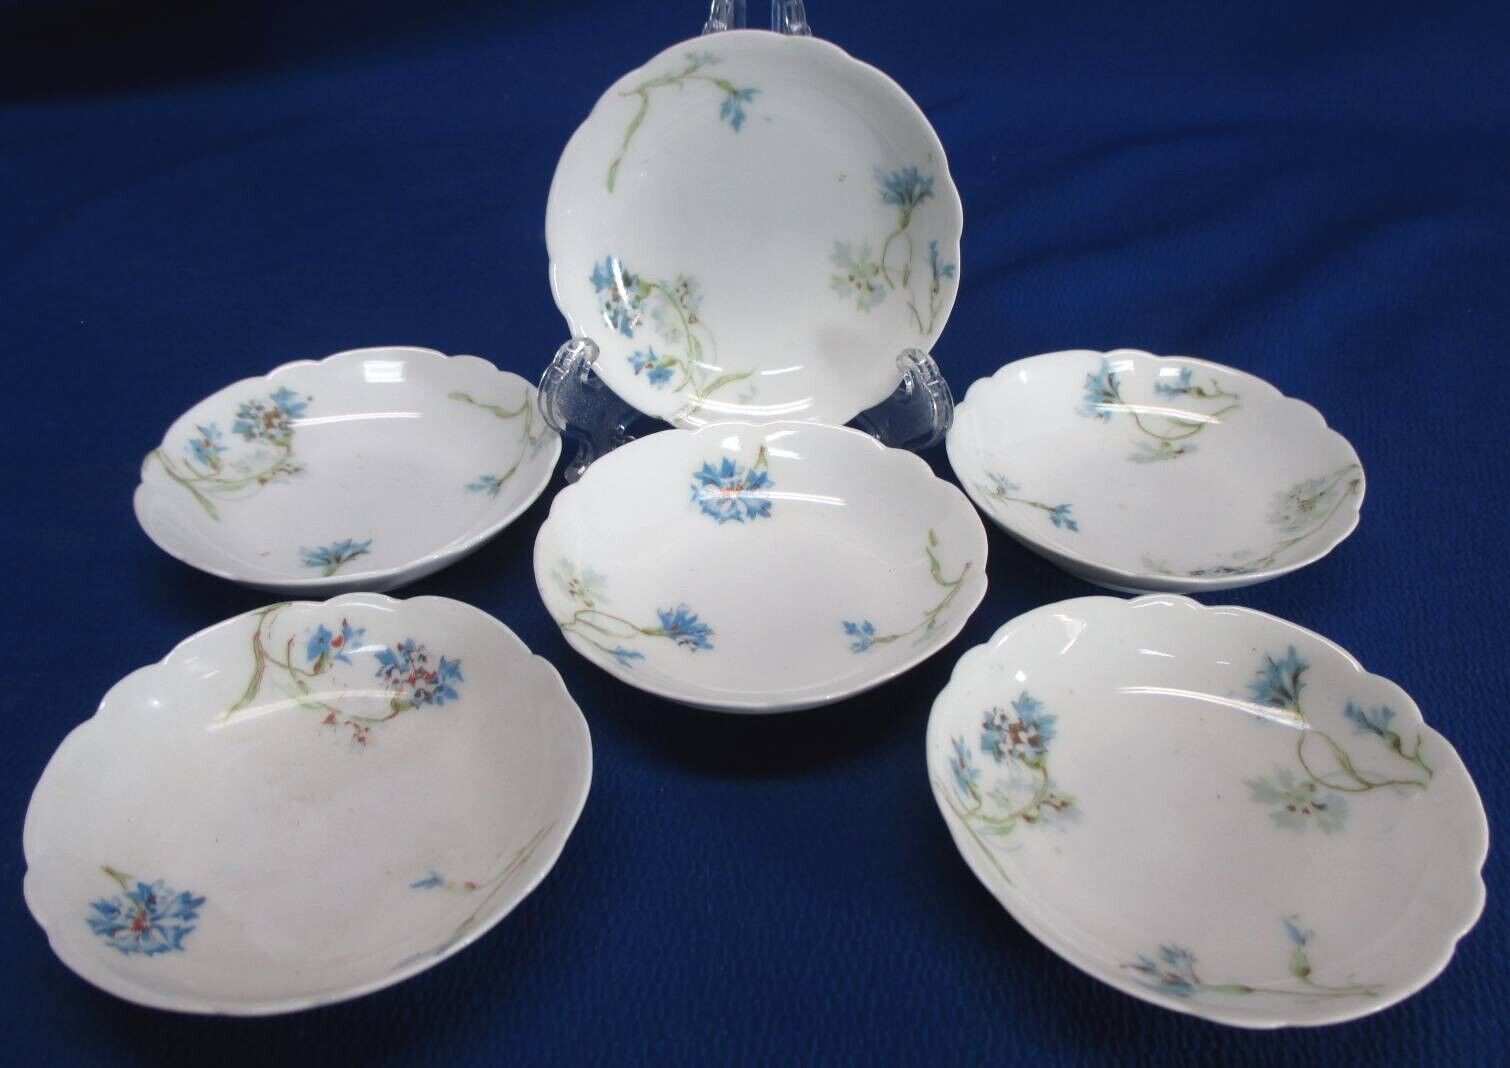 THEODORE HAVILAND LIMOGES FRANCE BLUE CORNFLOWERS 6 BUTTER PATS